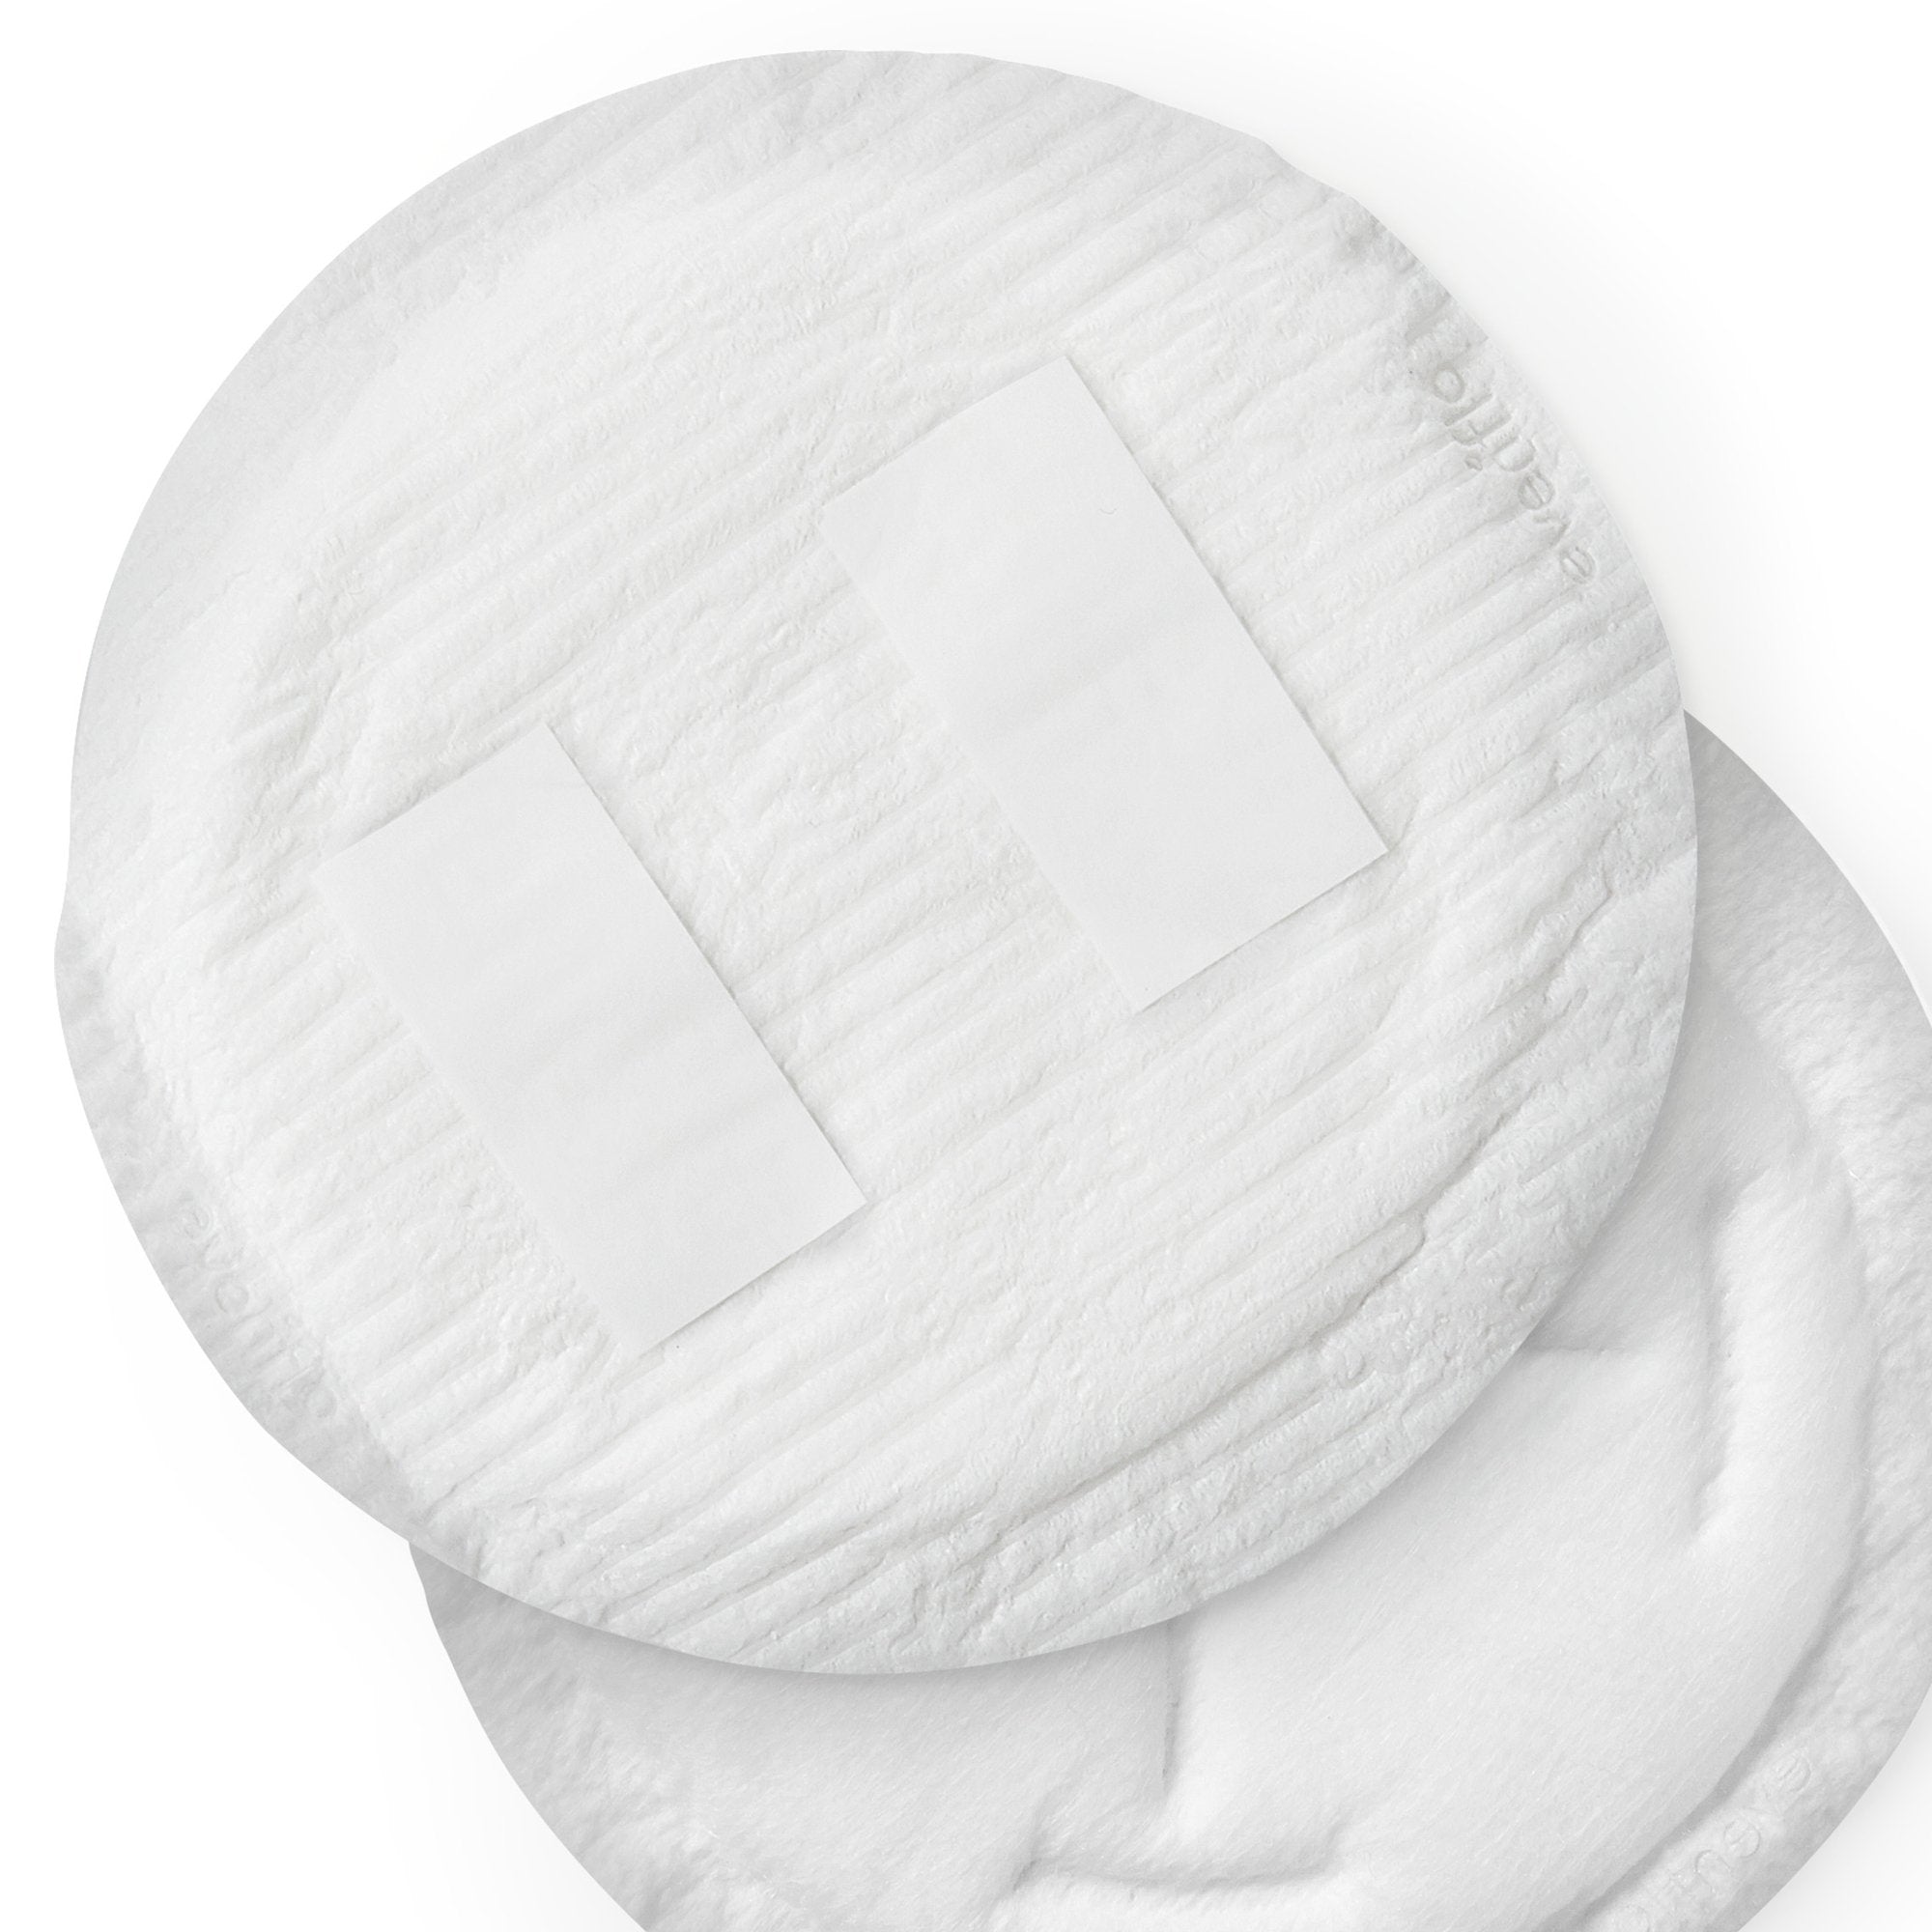 Nursing Pad Evenflo Advanced One Size Fits Most Soft Breathable Material Disposable